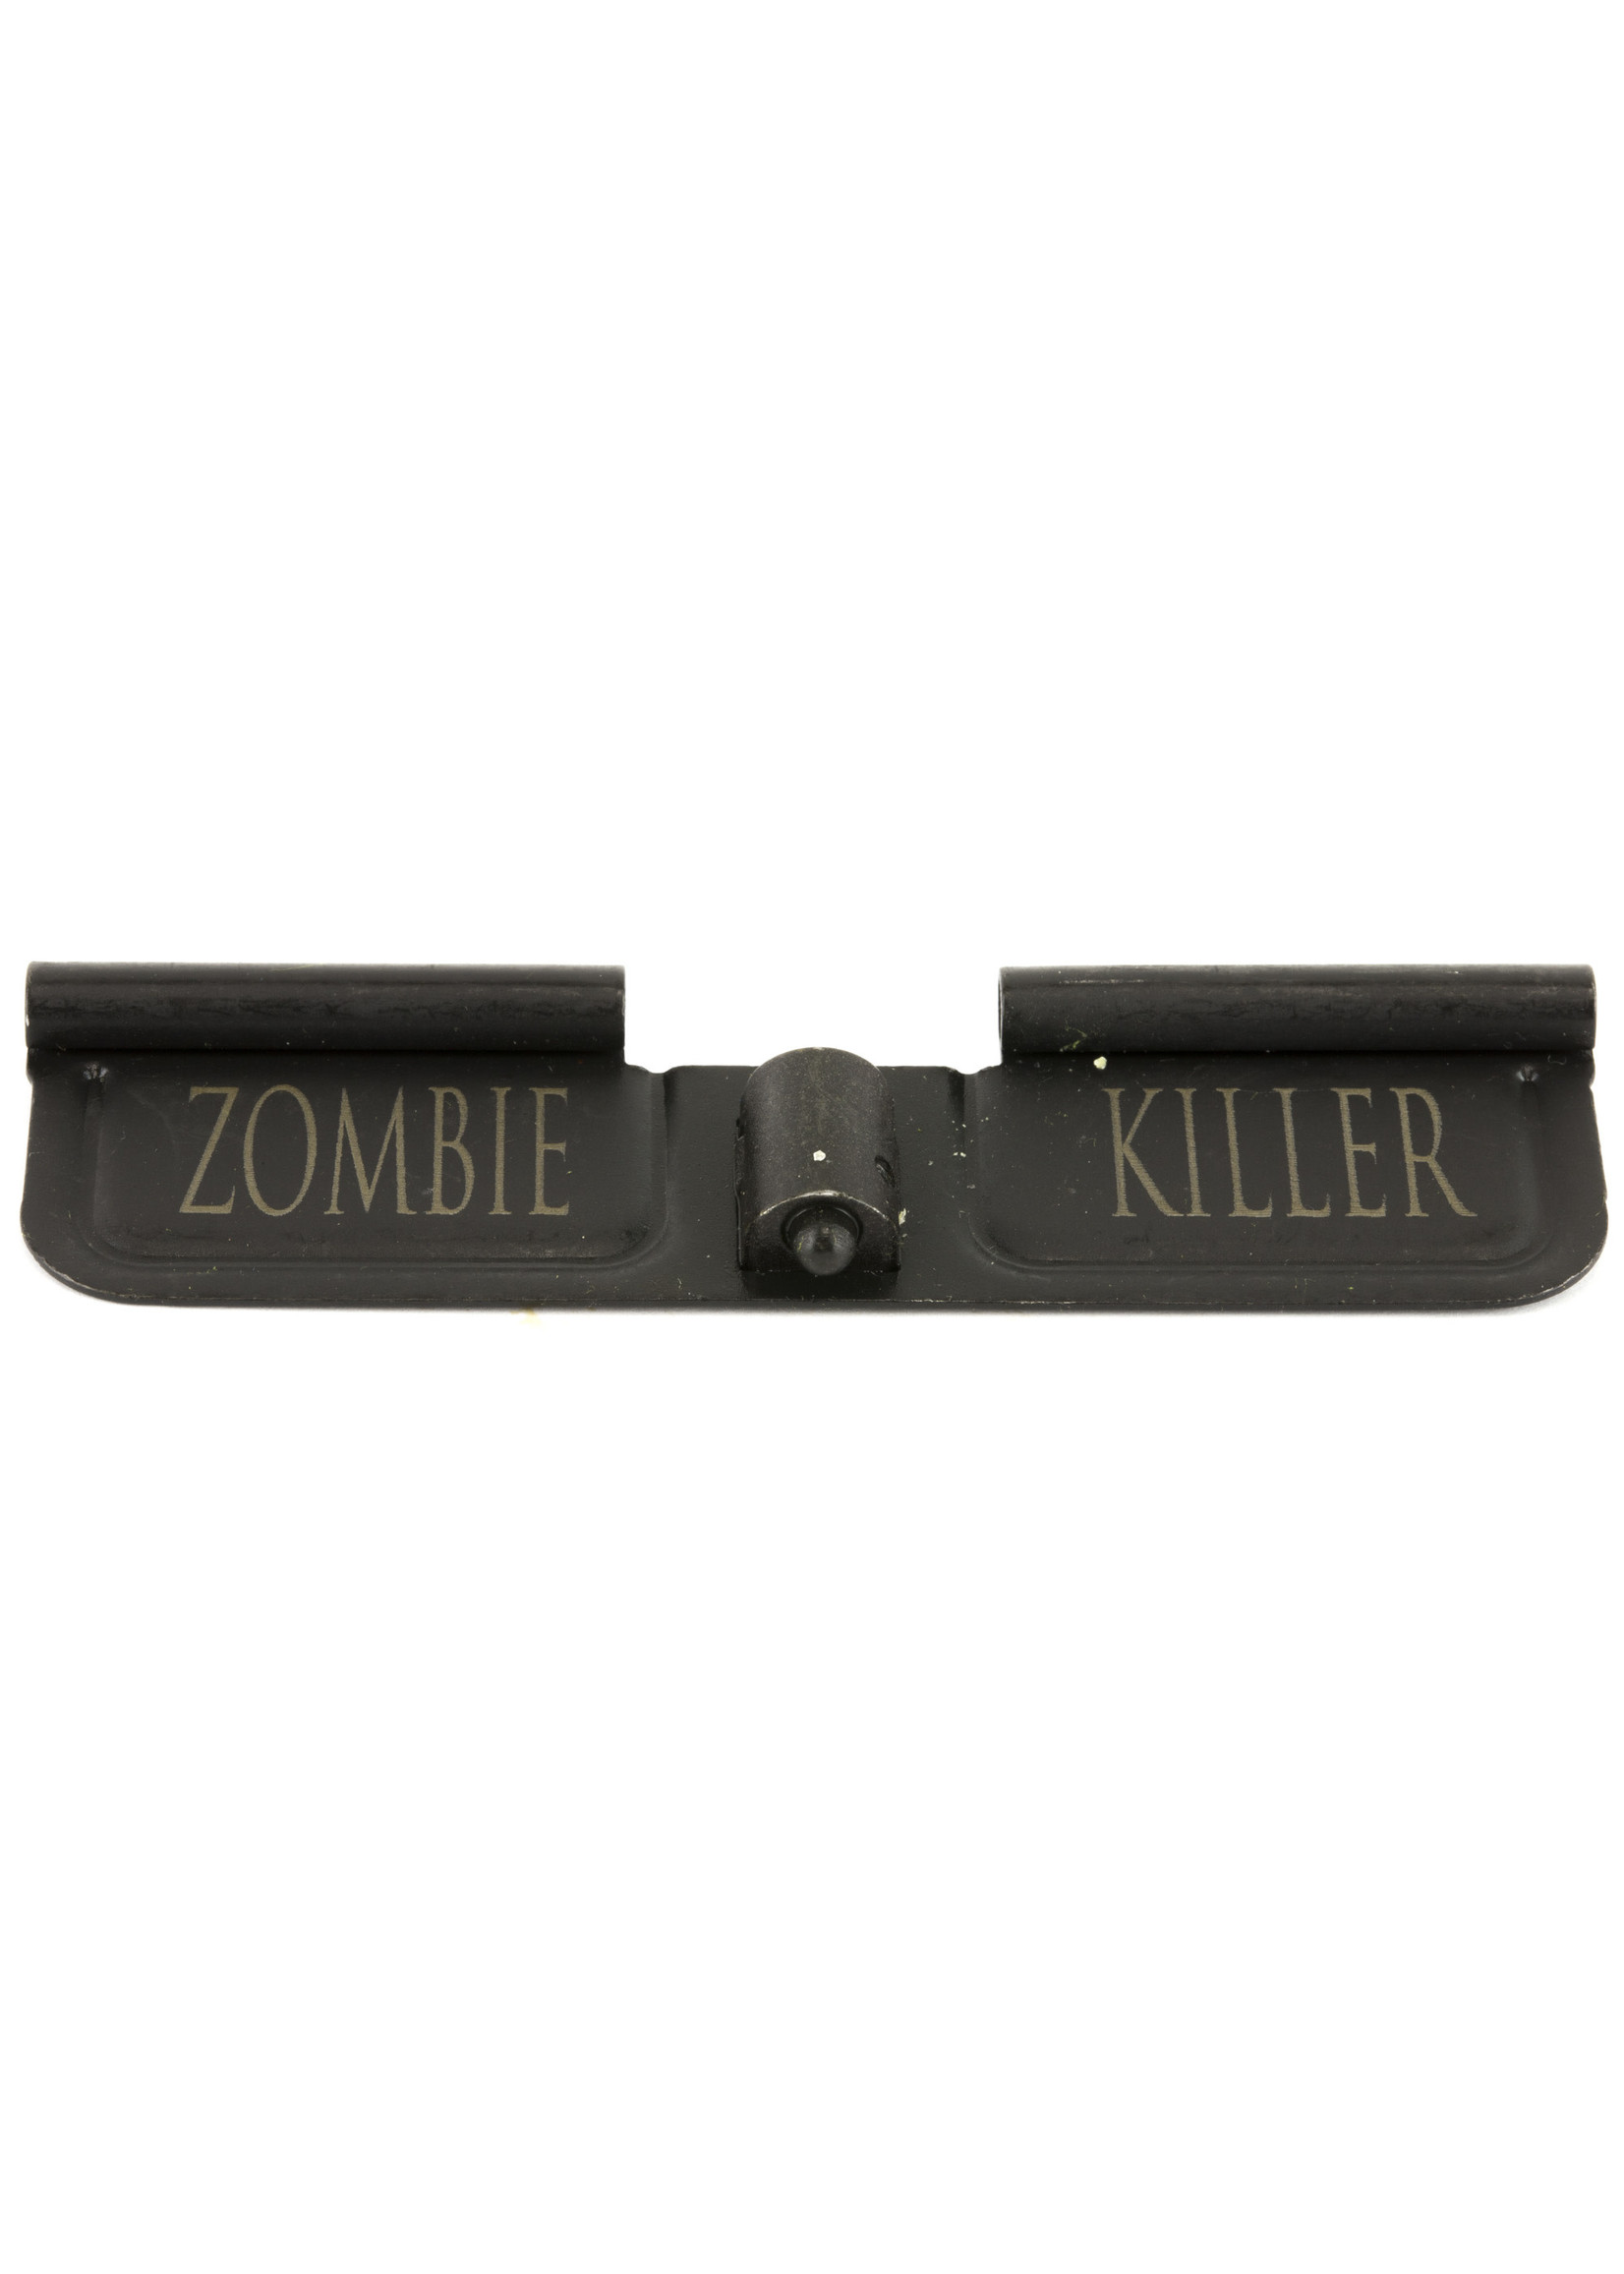 Spike's Tactical Spikes Ejection Port Door Zombie Killer AR-15 MFG# SED7007 UPC# 815648020248